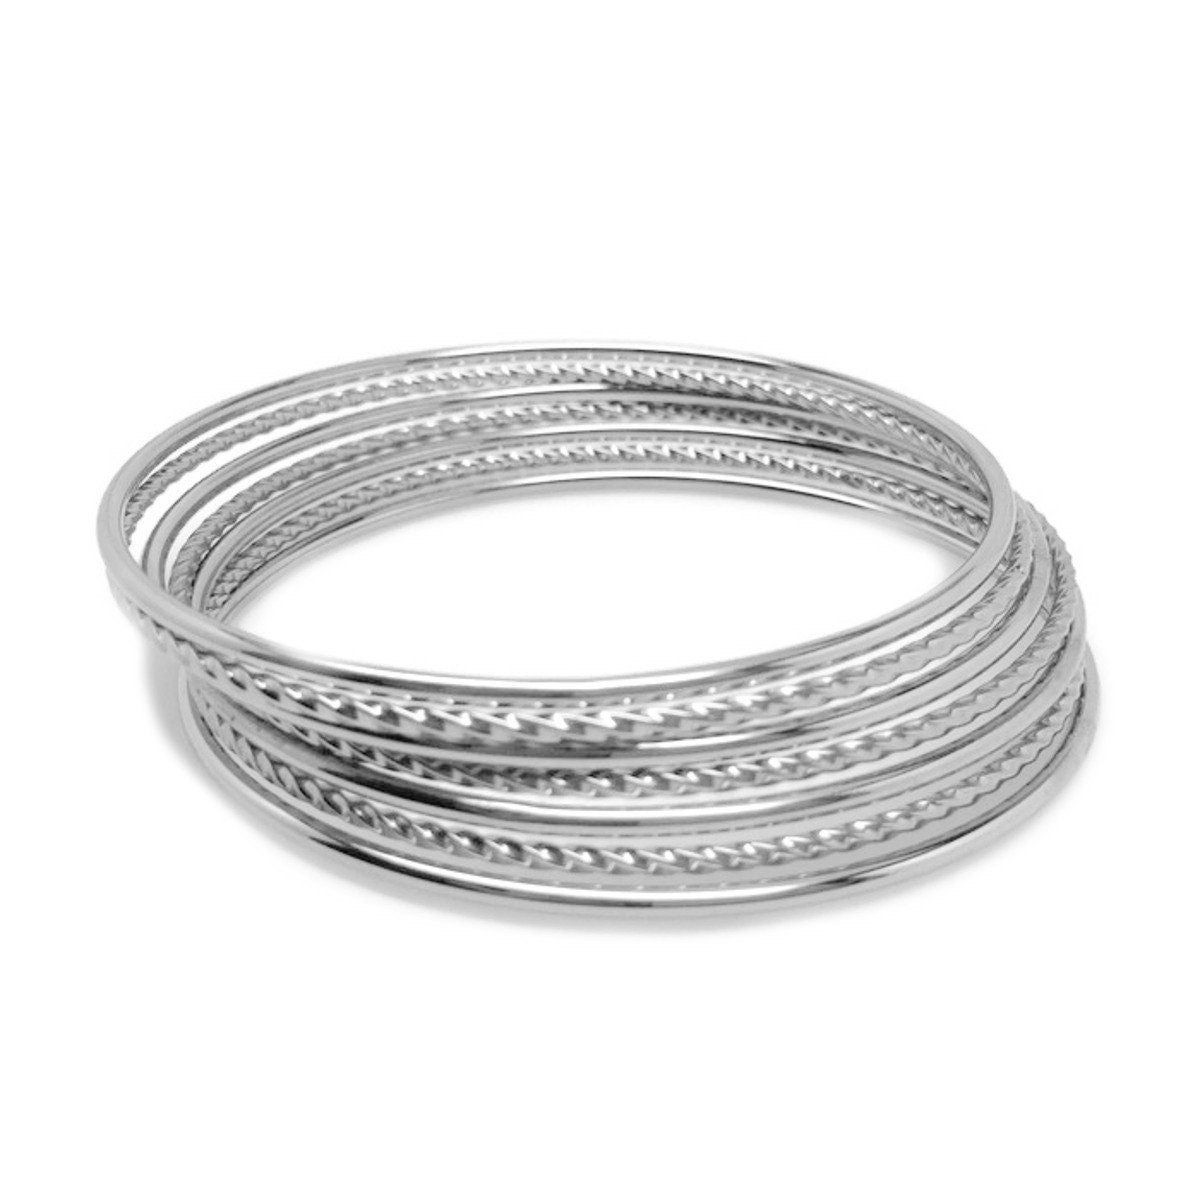 Thin Round Stainless Steel Bangle Bracelet - Womens Jewelry - Silver Color, Non Tarnish, Waterproof, Large Wrists, M - 8 / 1